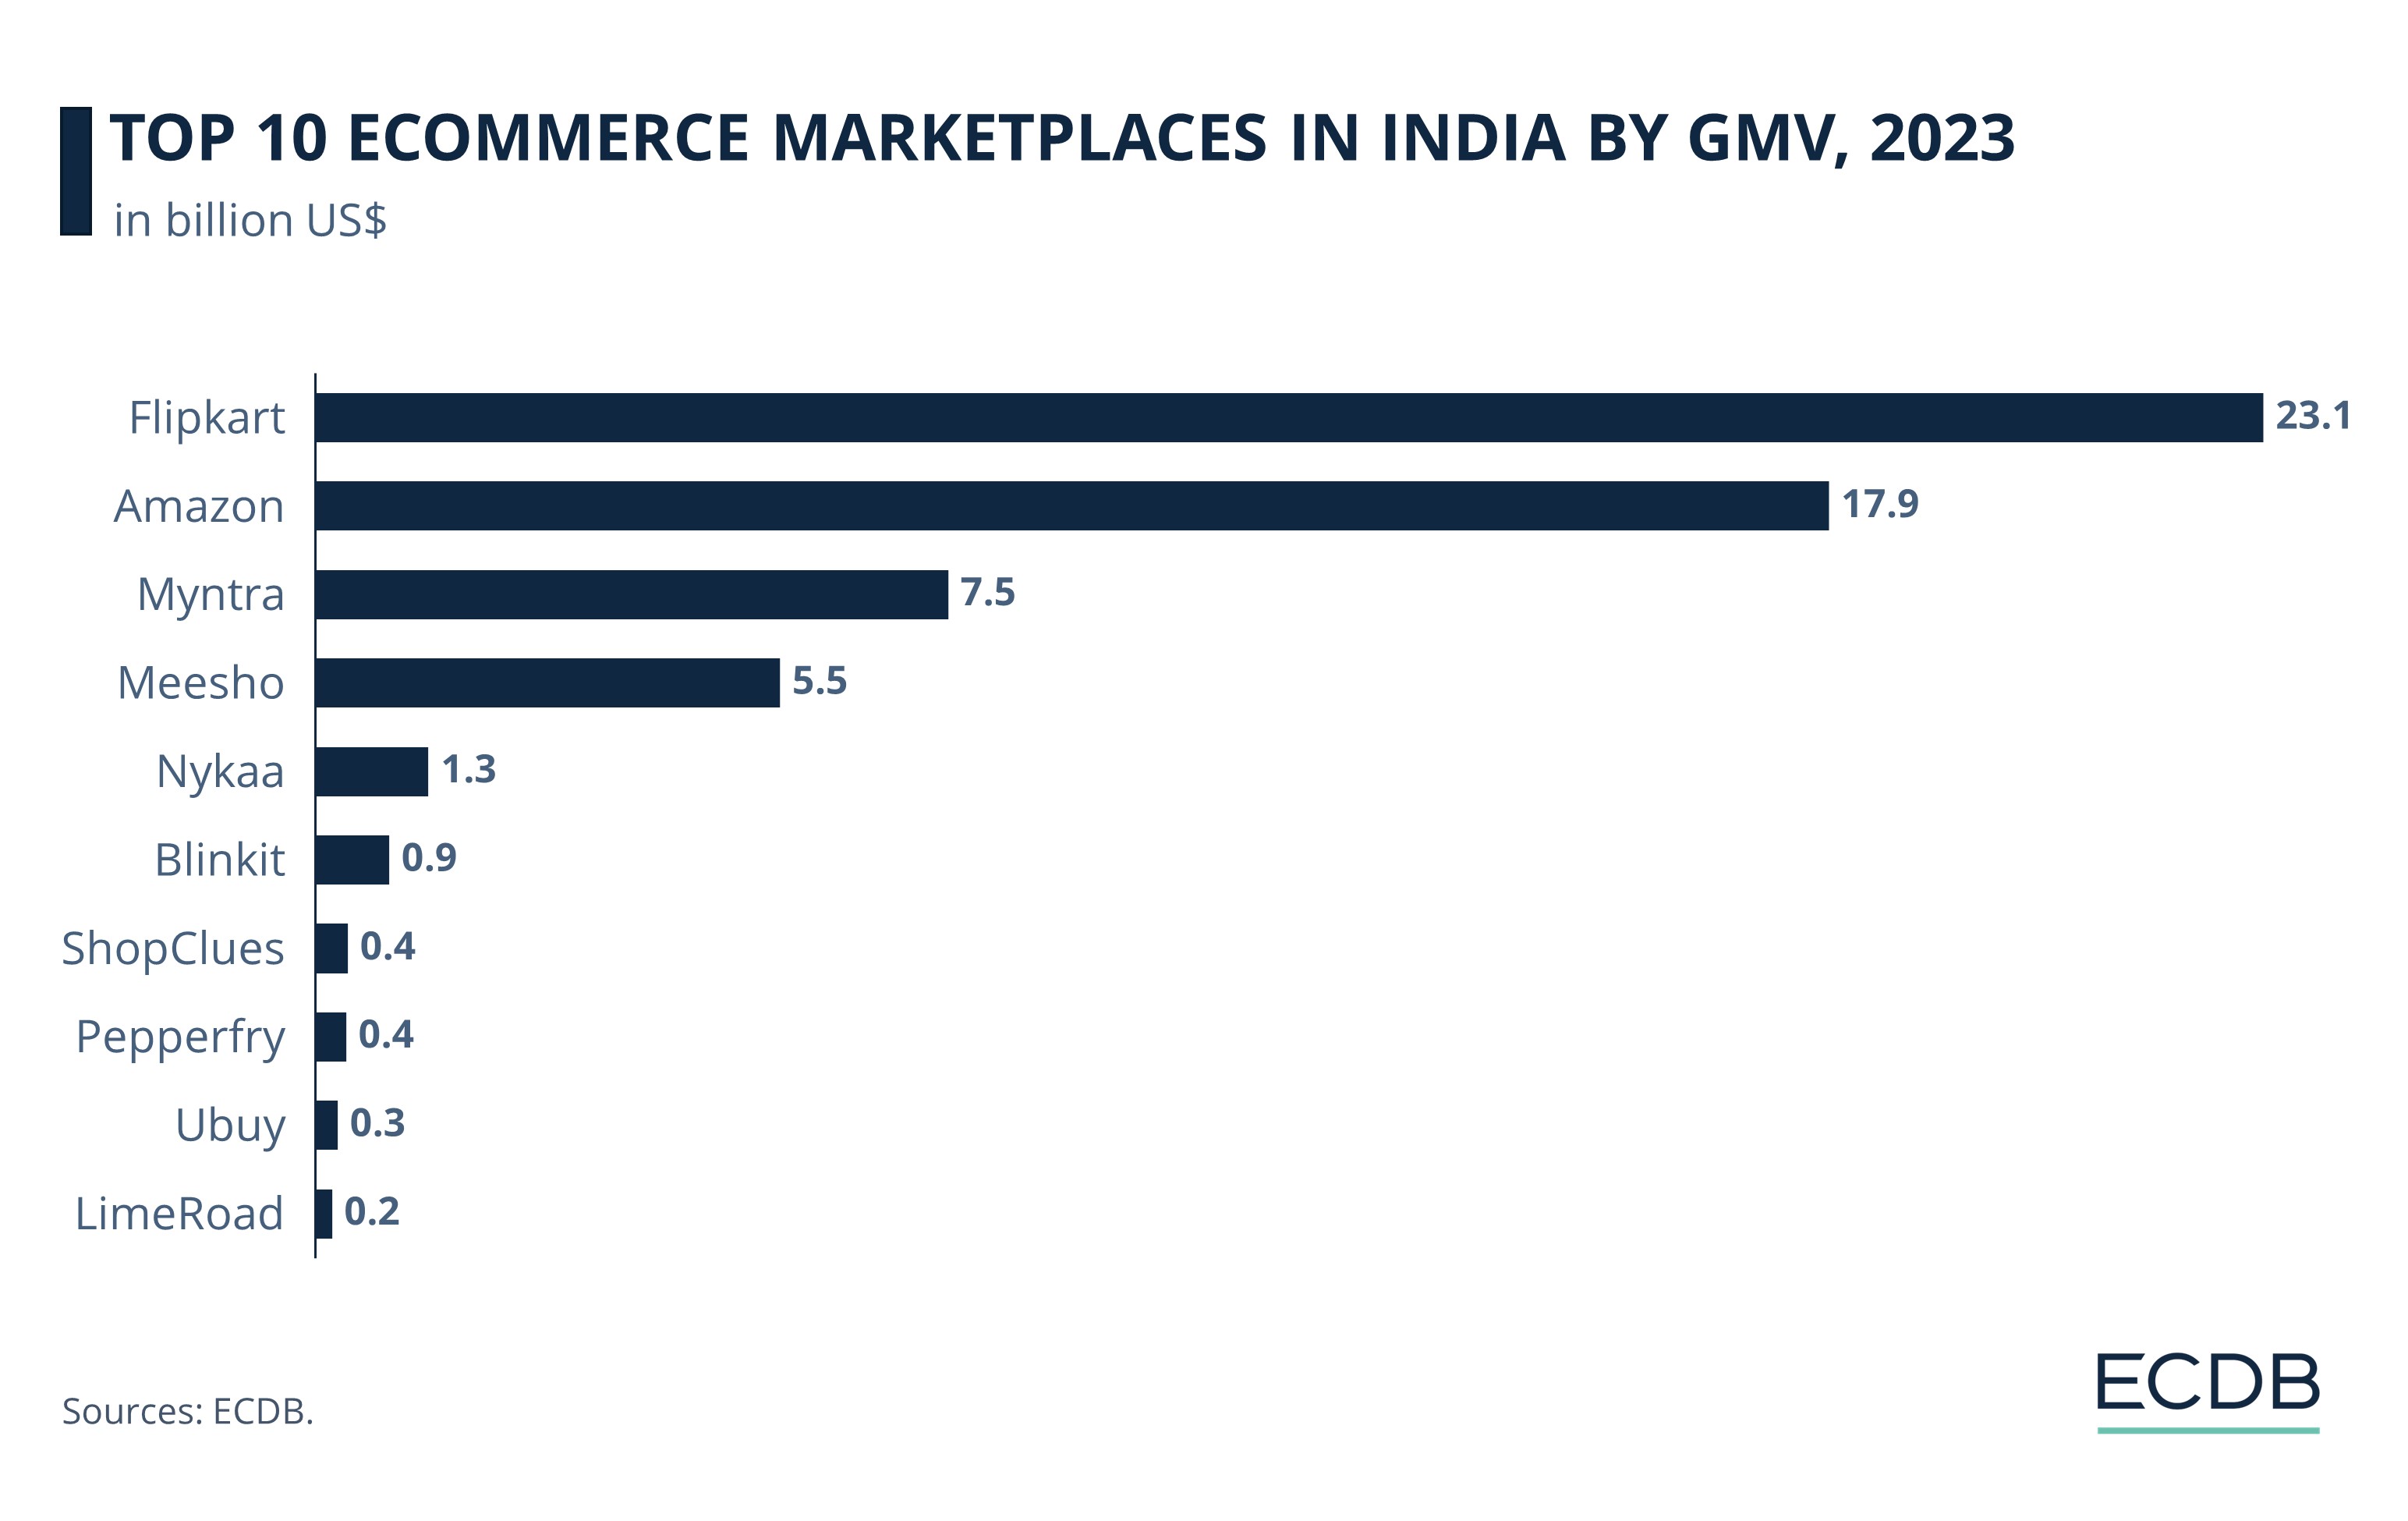 Top 10 Ecommerce Marketplaces in India by GMV, 2023